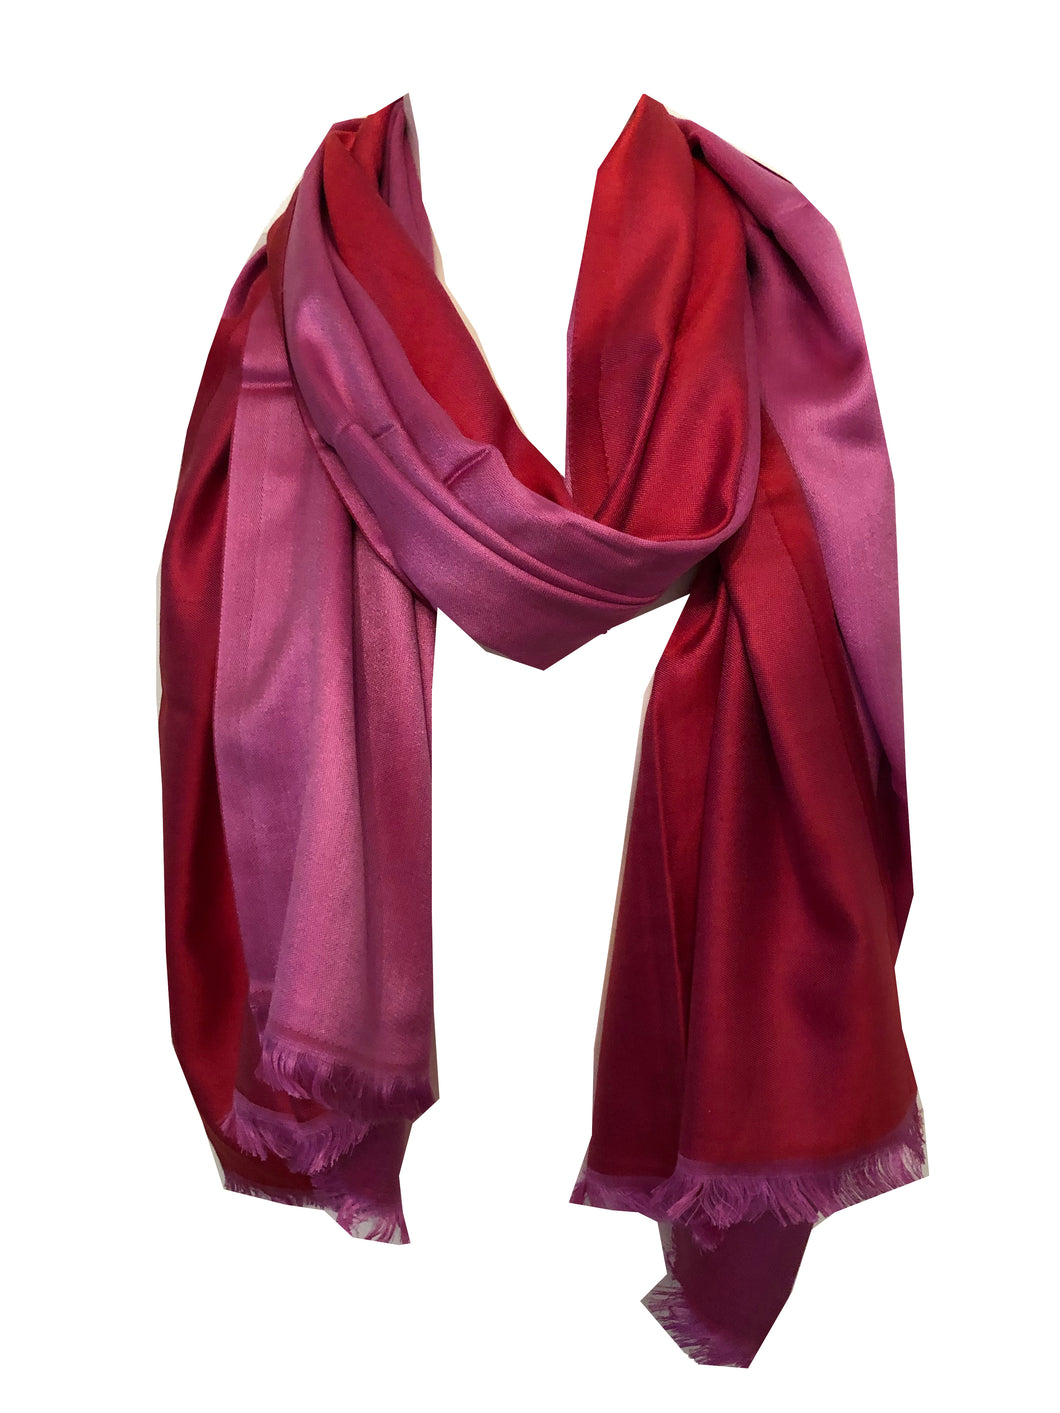 Red and Pink Reversible 100% Silk Scarf/wrap with Slightly Frayed Edge Lovely Long Scarf